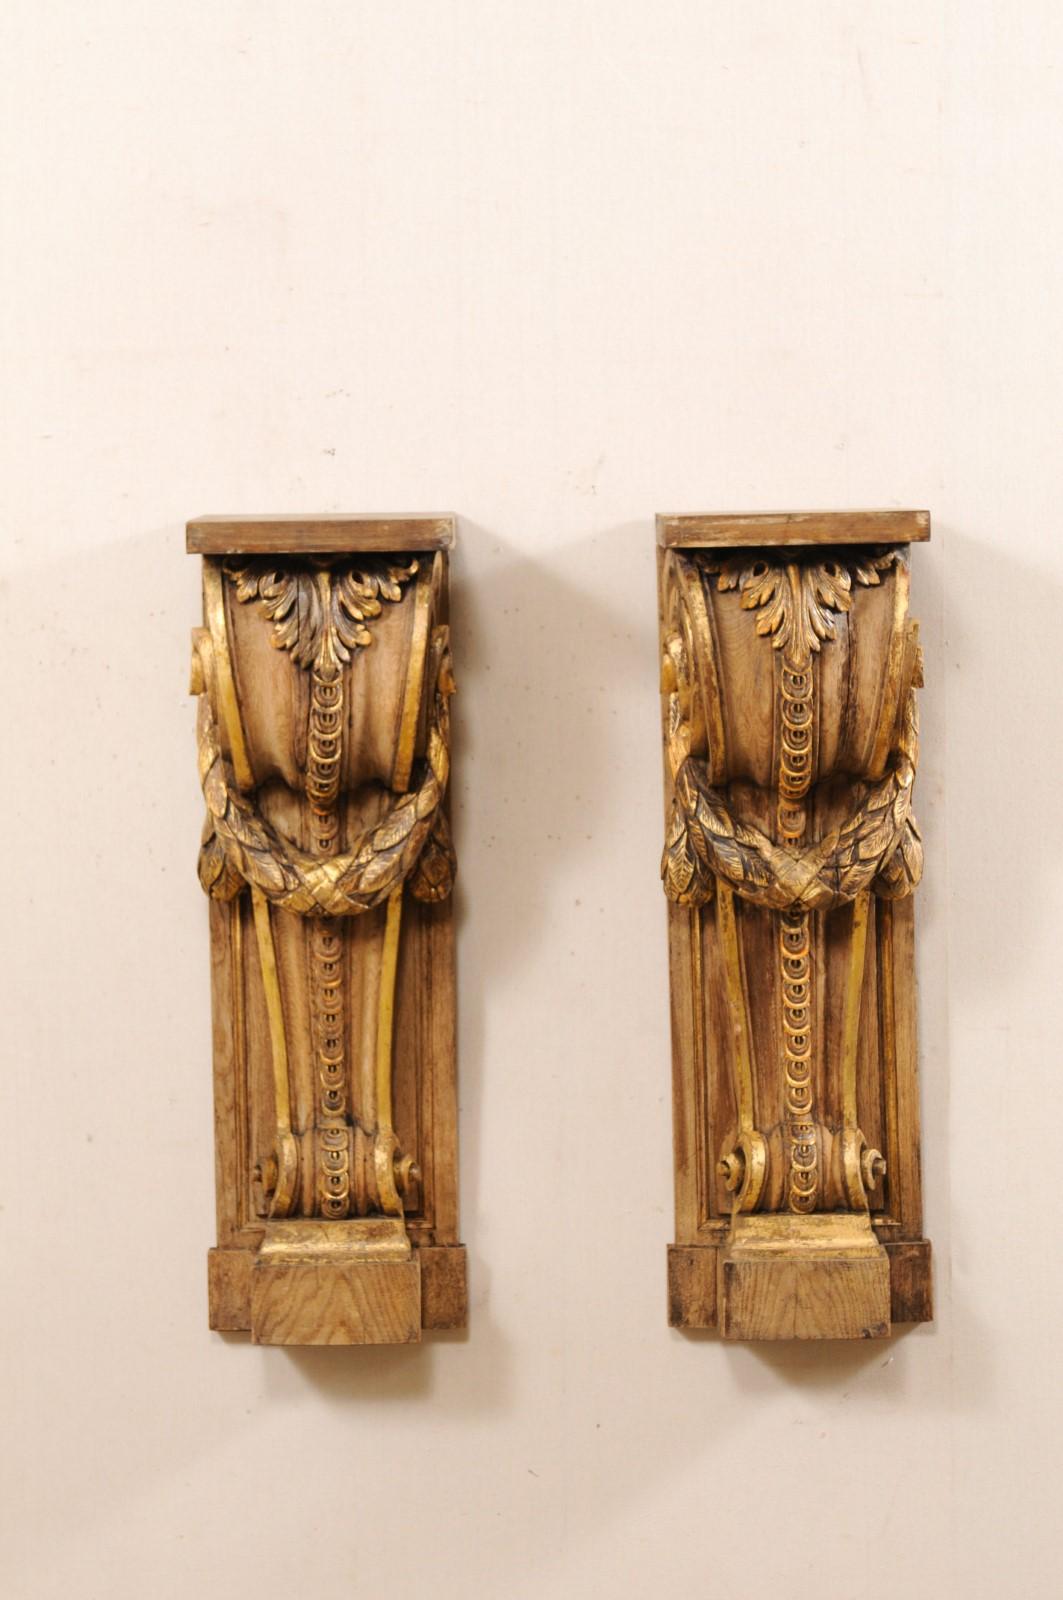 A French pair of carved and giltwood corbels from the 19th century. These antique decorative wall brackets from France each feature exquisite volute carved bodies with an acanthus leaf rolling down it's topside, and garland swag draped across it's